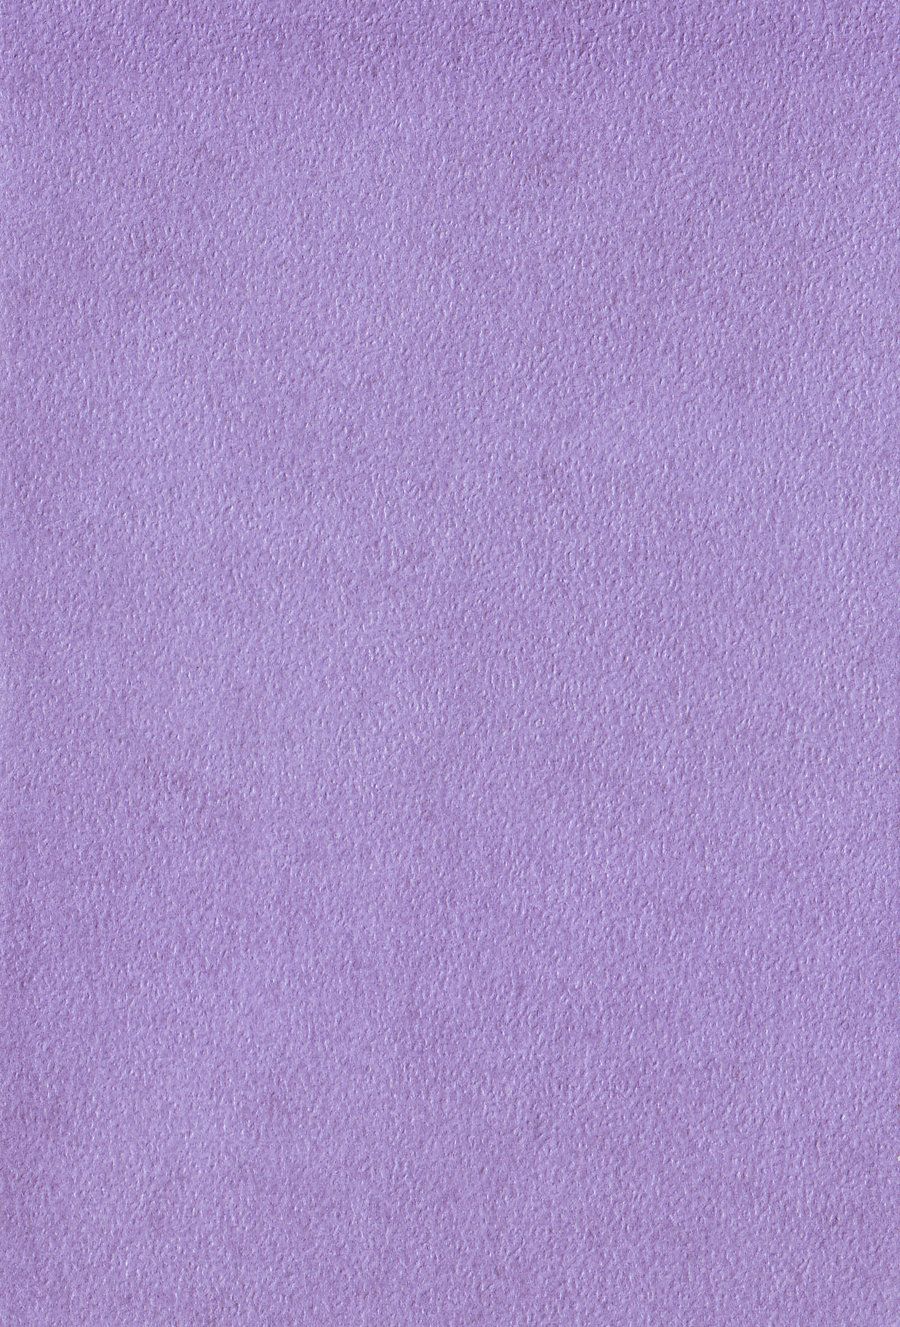 Lilac Wallpaper (44+ images)